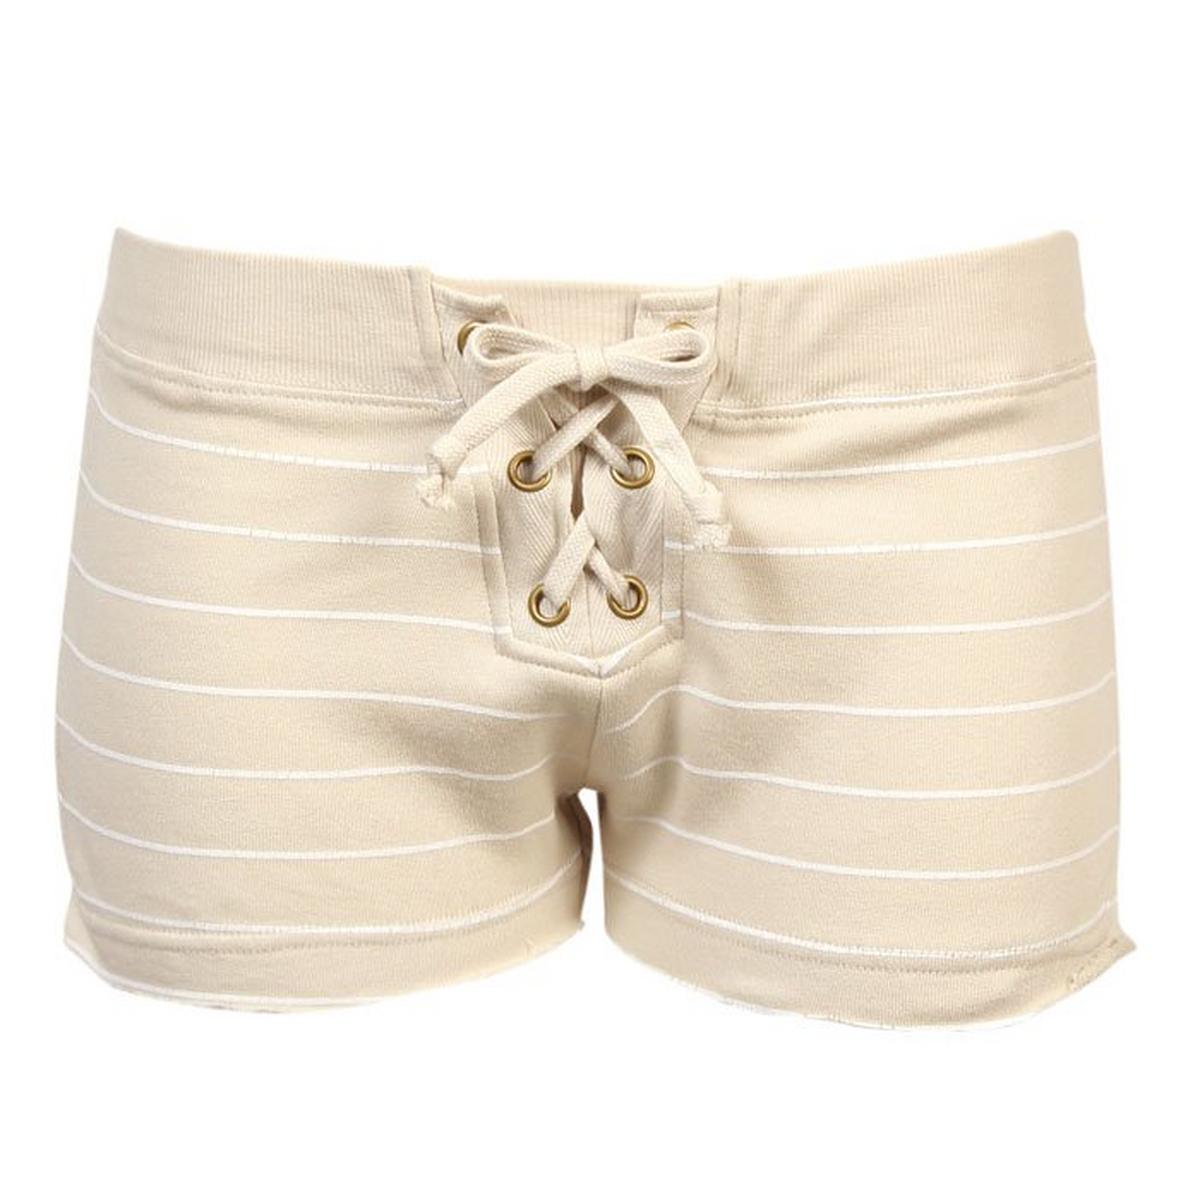 Women's Striped Lace-Up Short